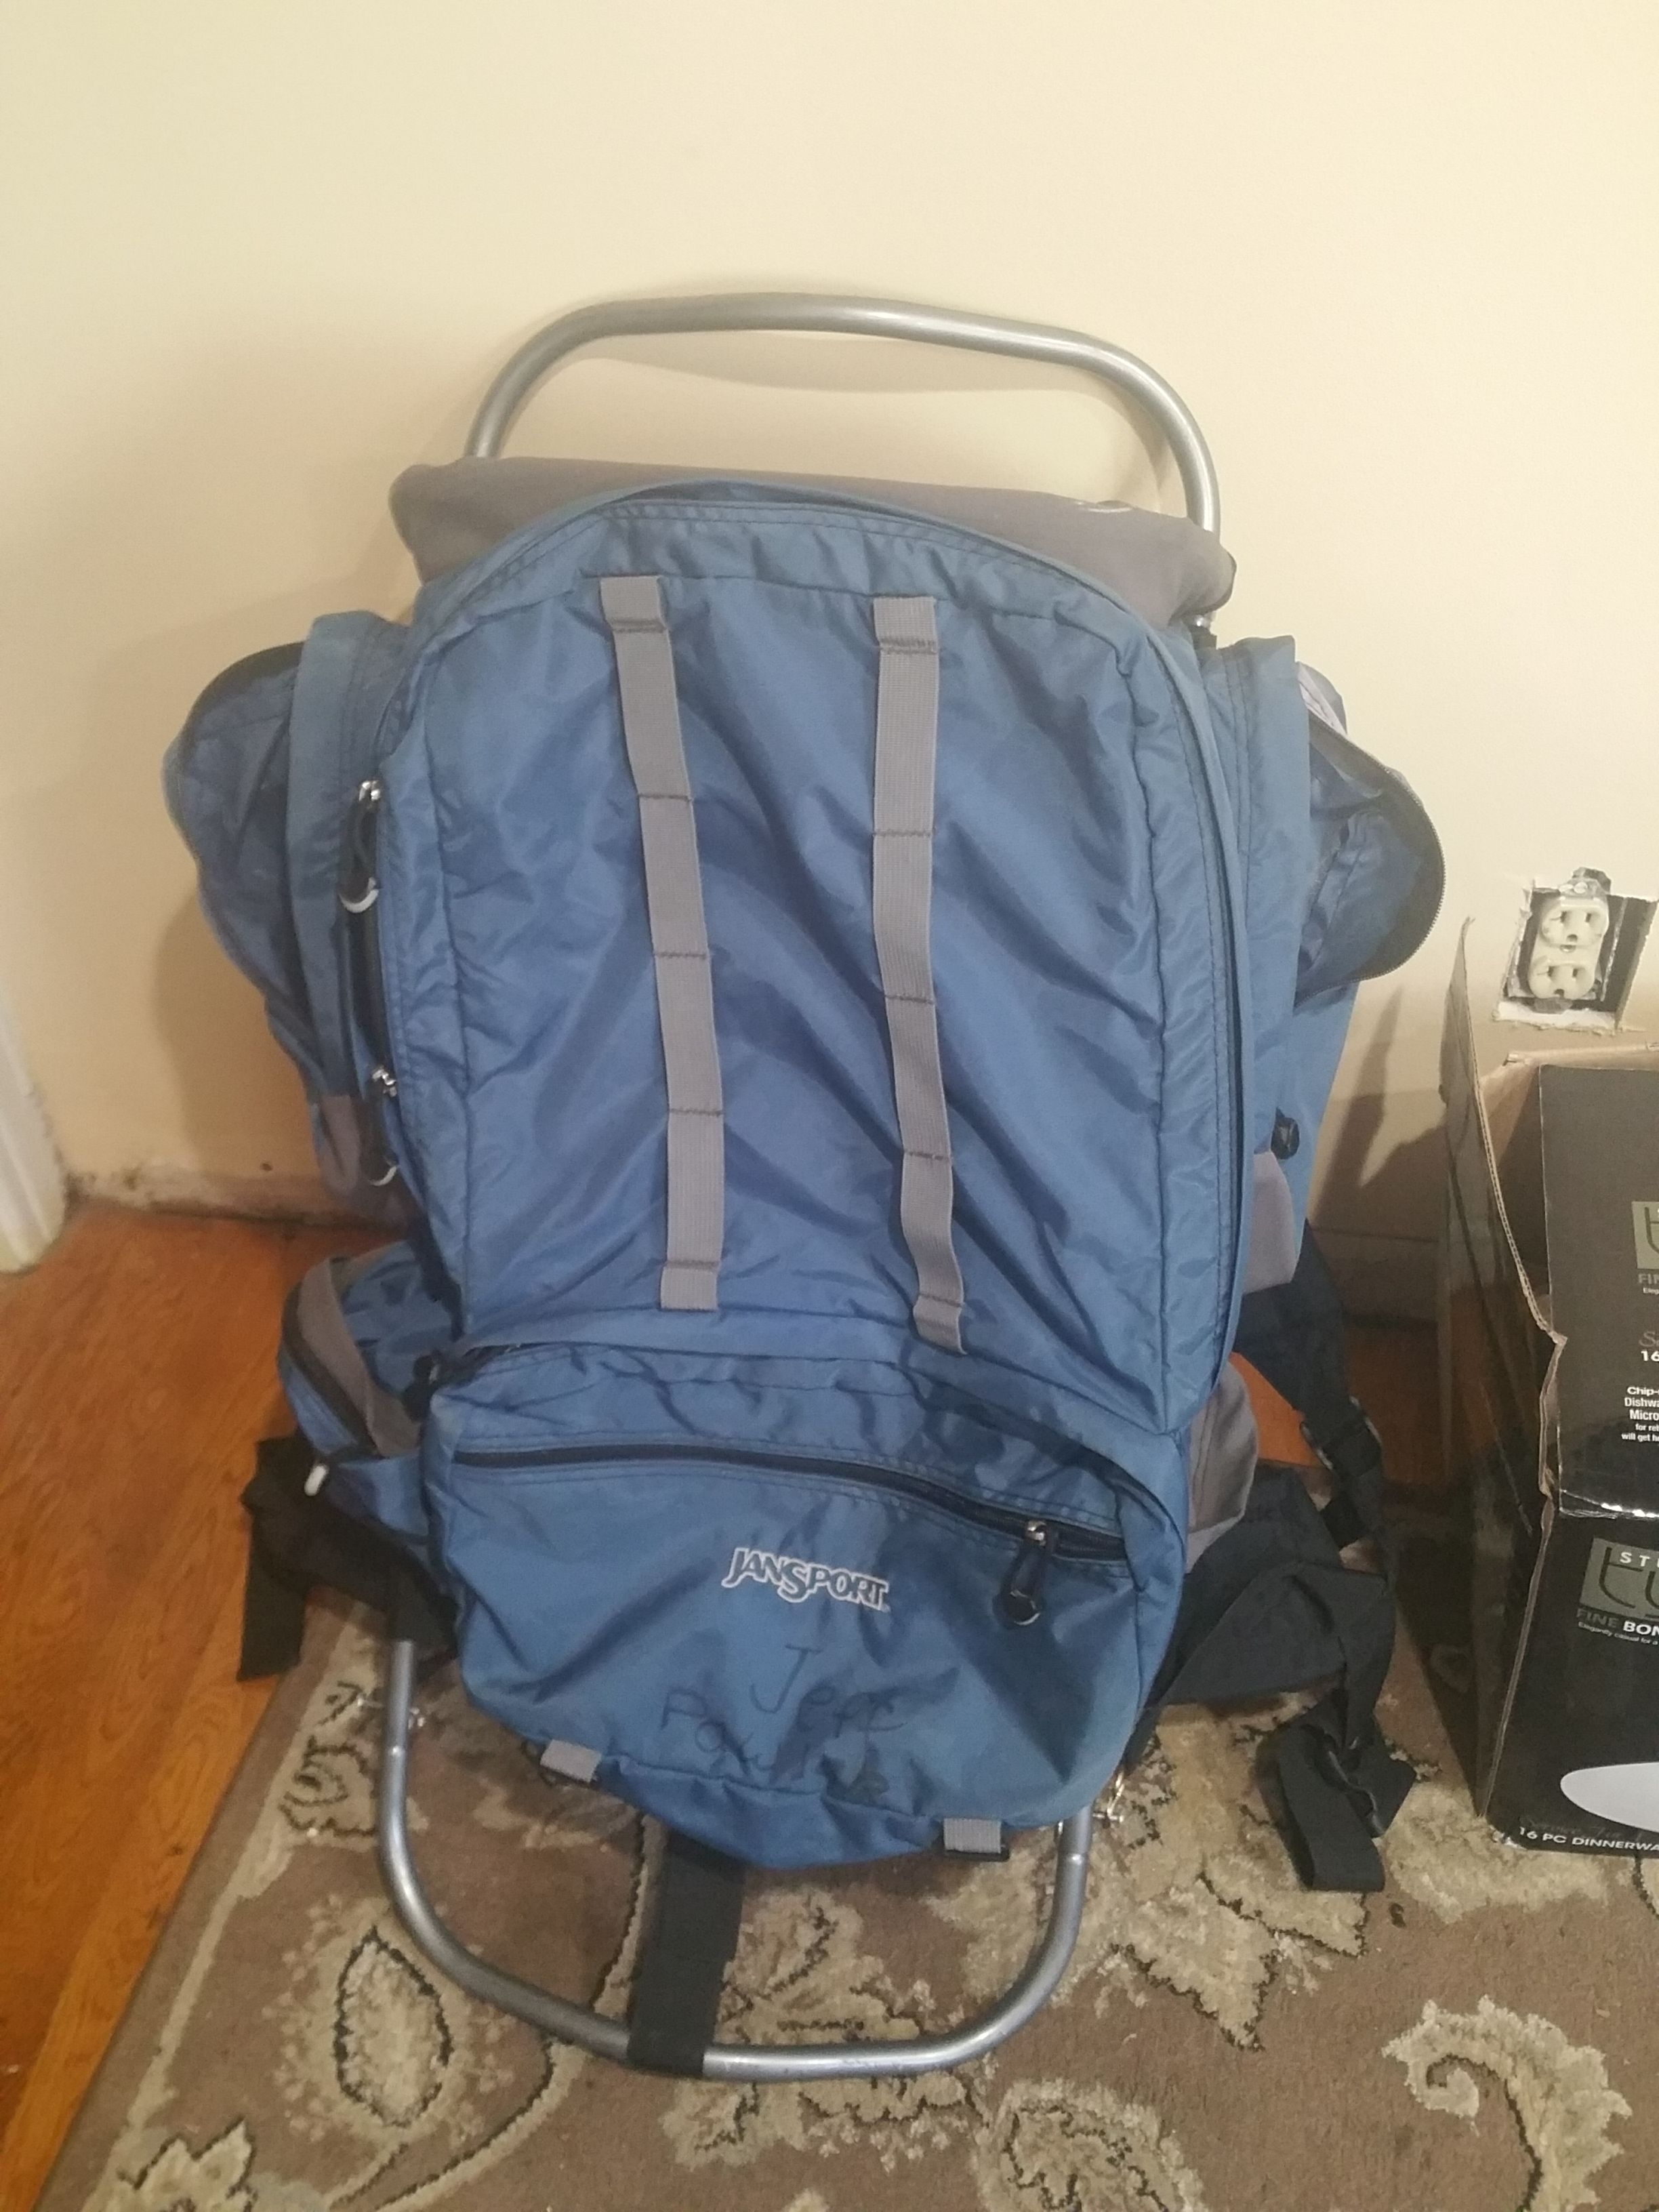 JANSPORT HIKING BACKPACK WITH ALUMINUM FRAME EXCELLENT CONDITION